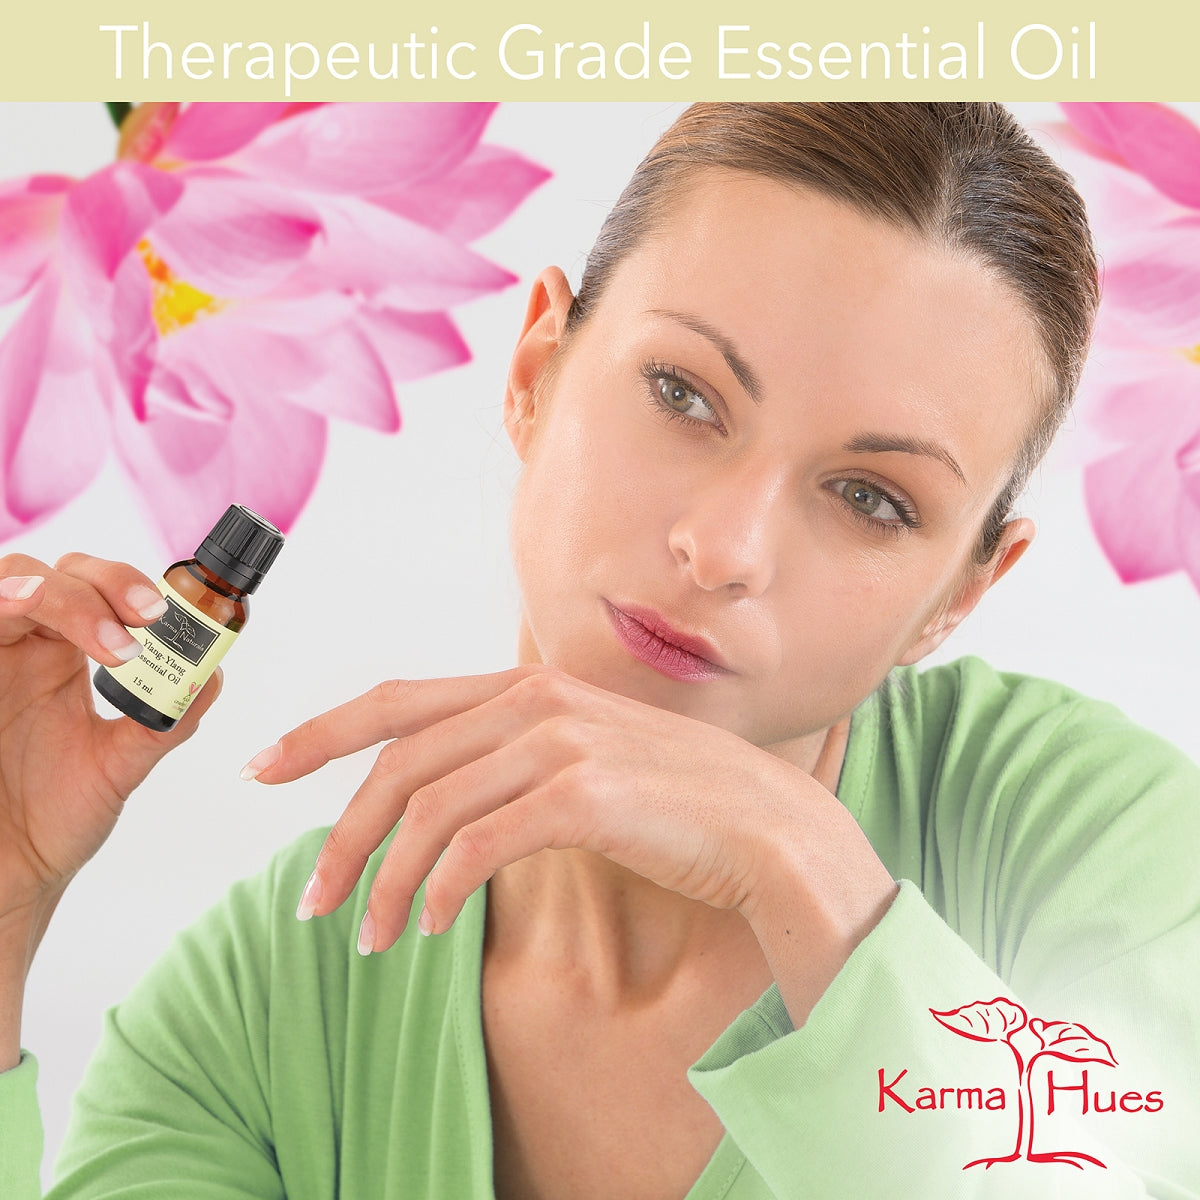 Ylang Ylang Essential Oil : 100% Pure Therapeutic Grade (15 ml)